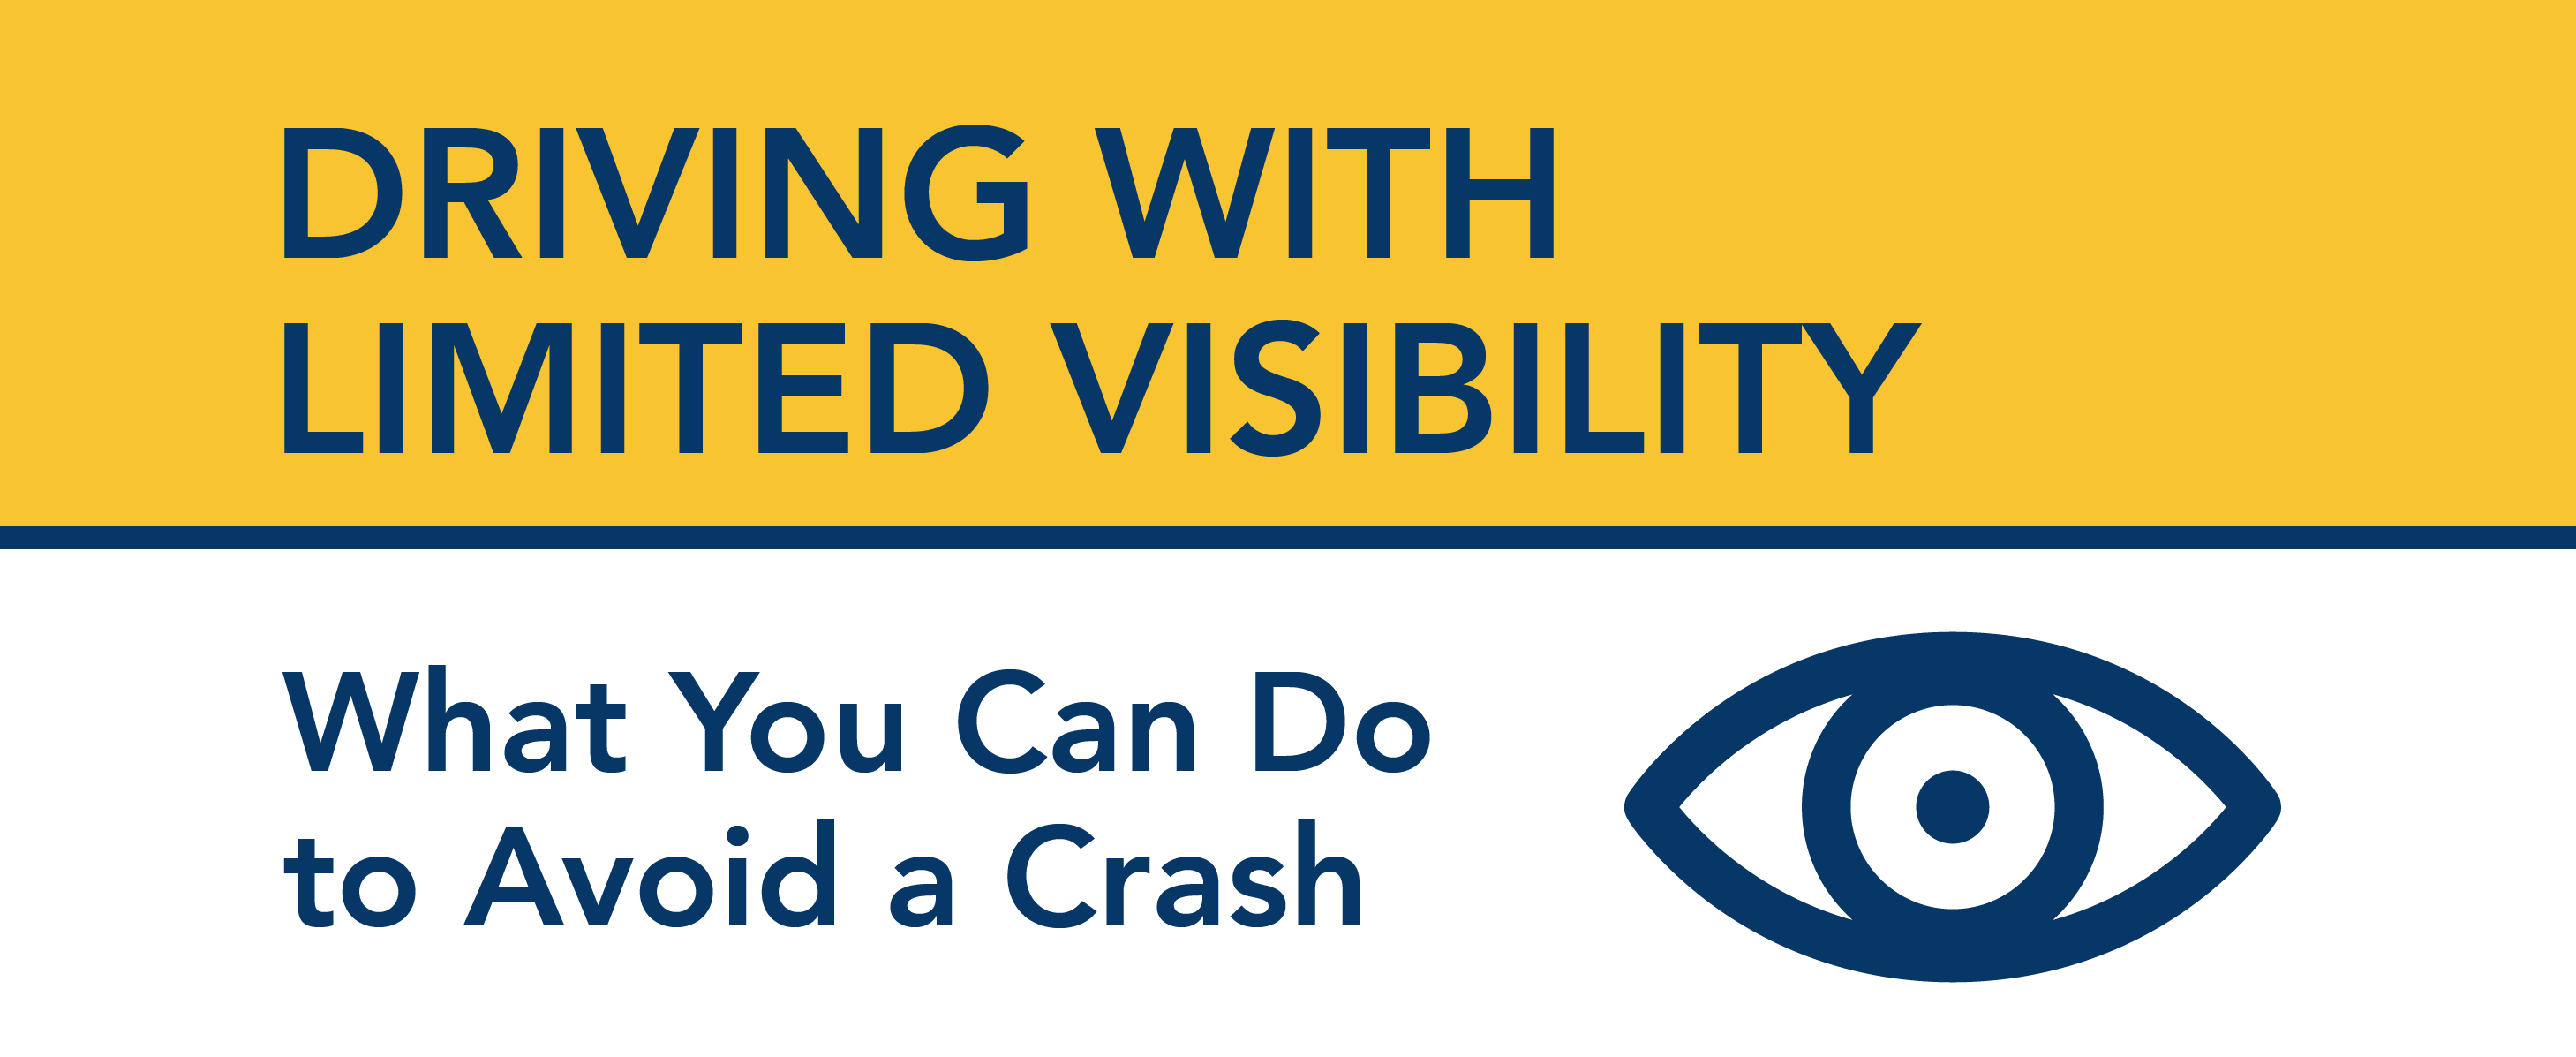 Driving with Limited Visibility. What You Can Do to Avoid a Crash.